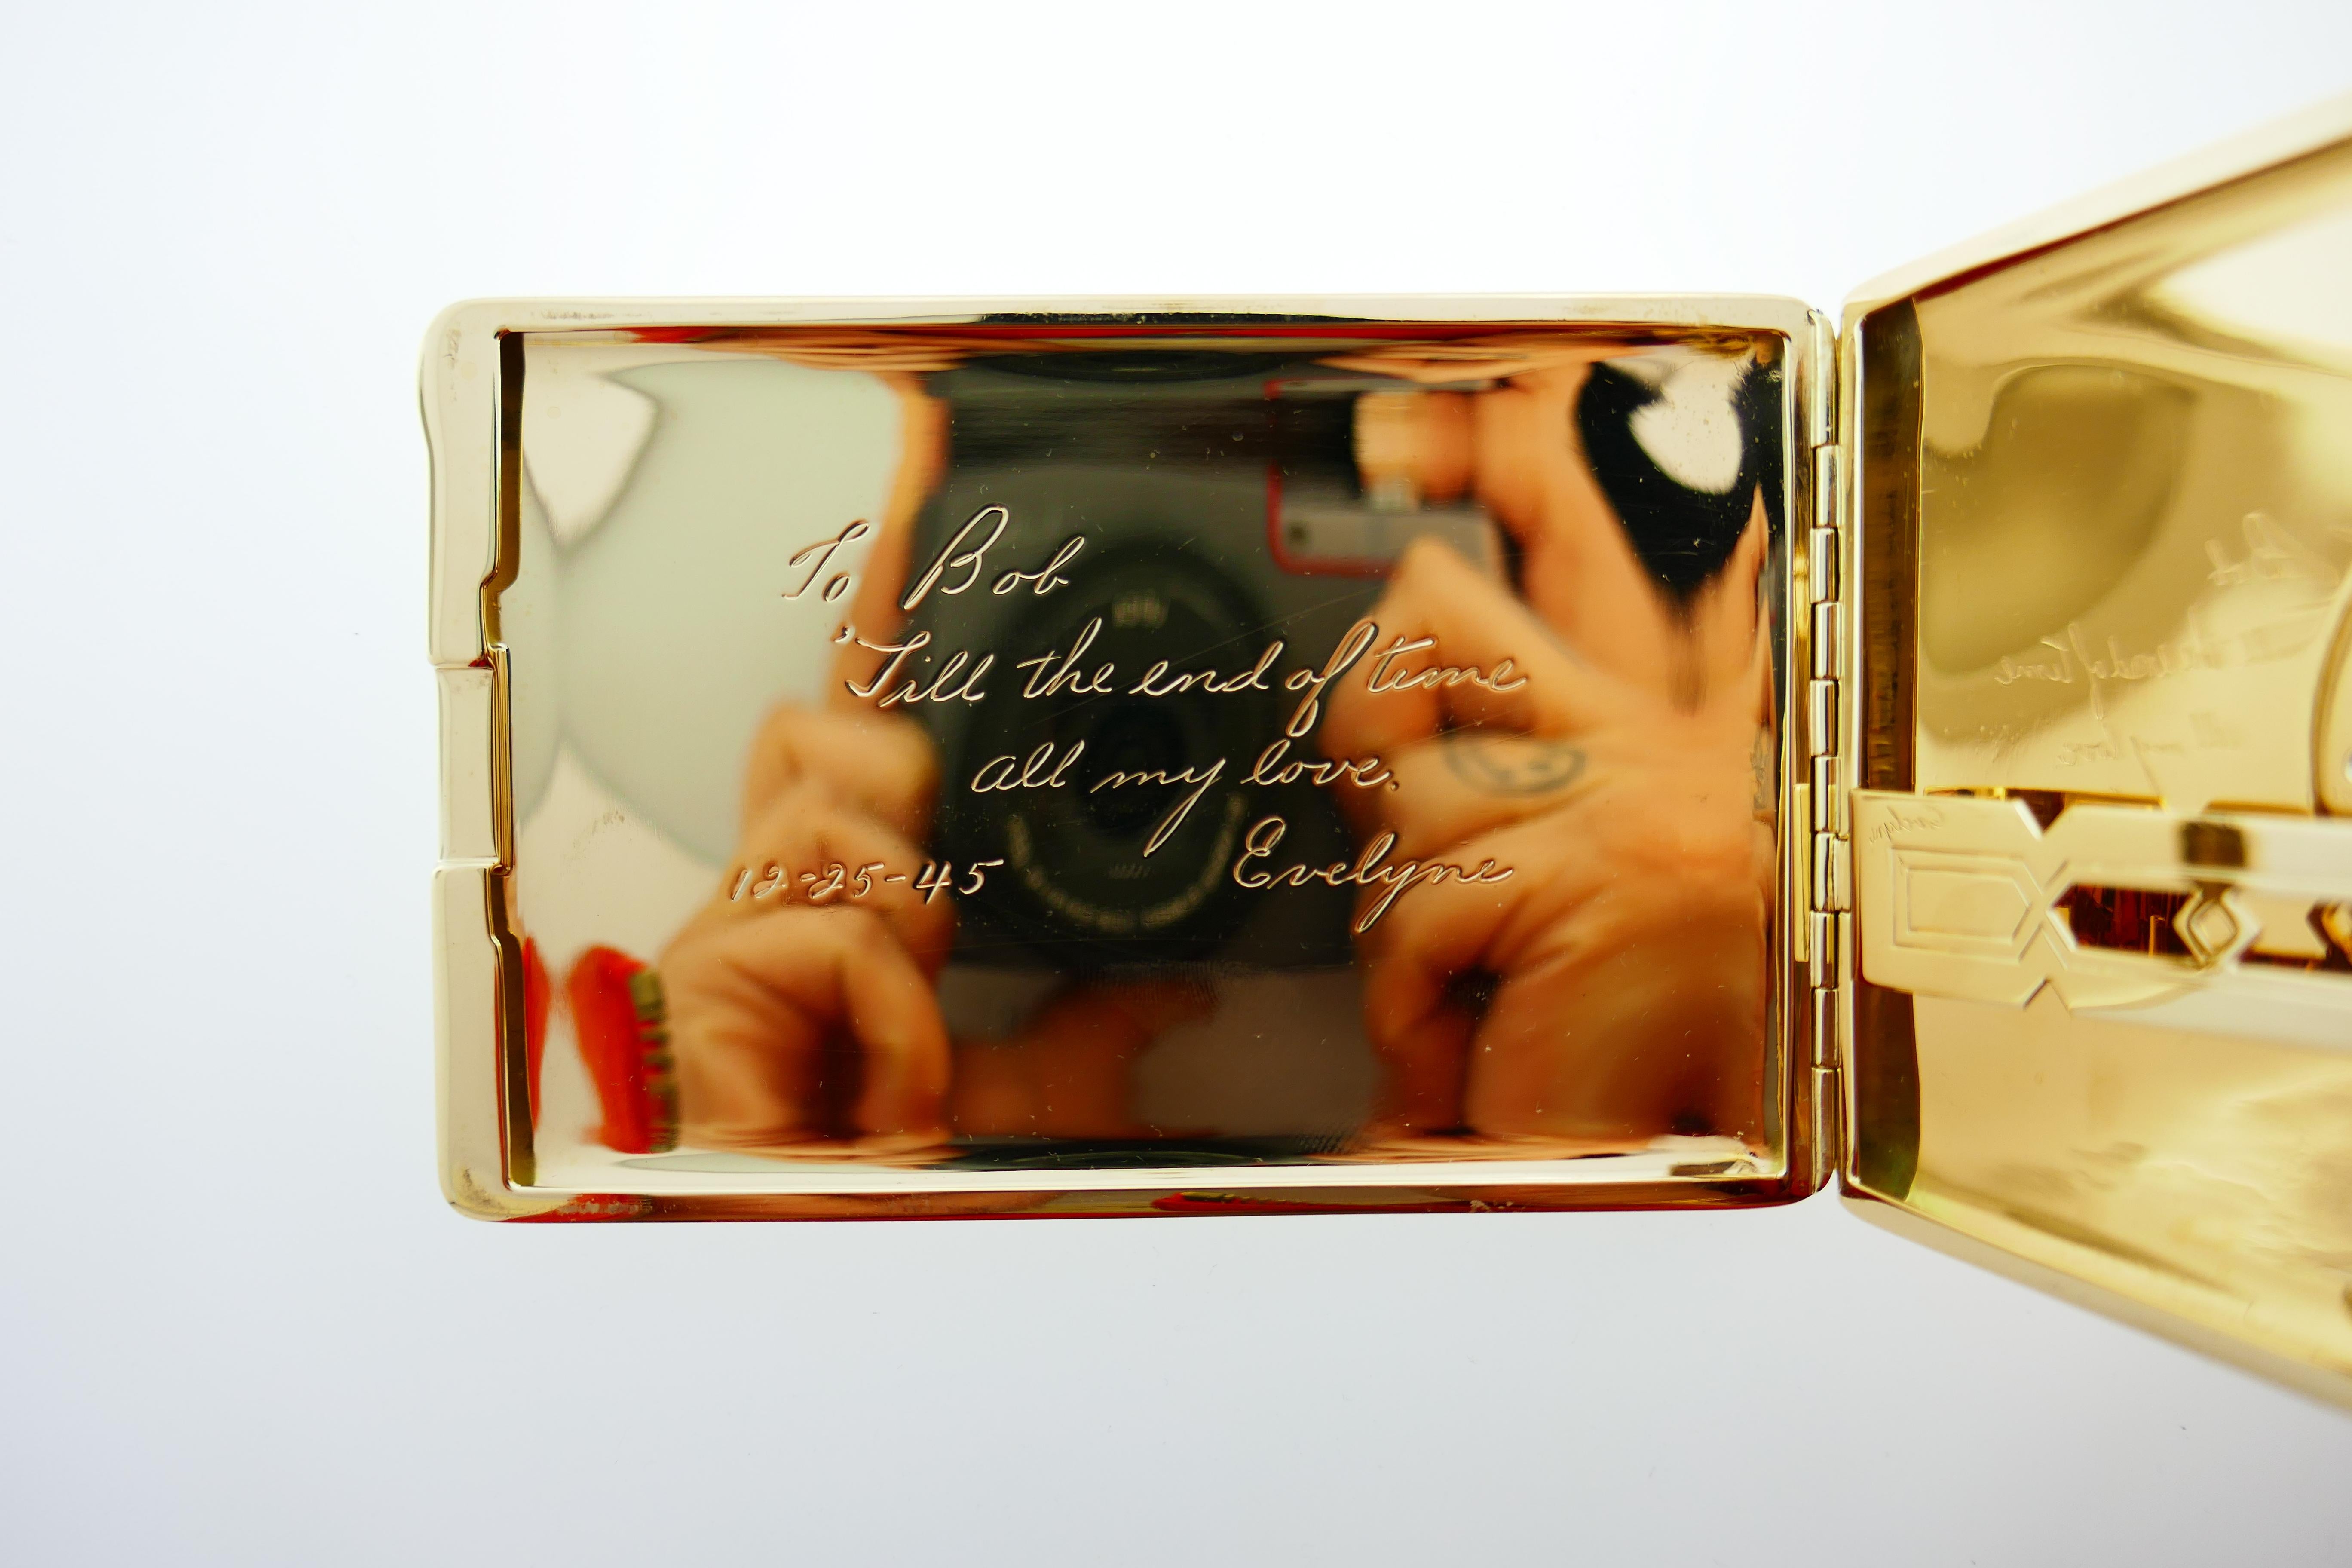 Here is your chance to purchase a beautiful and highly collectible designer cigarette / card box.  Truly a great piece at a great price! 

Weight: 146.6 grams

Dimensions: 4.75